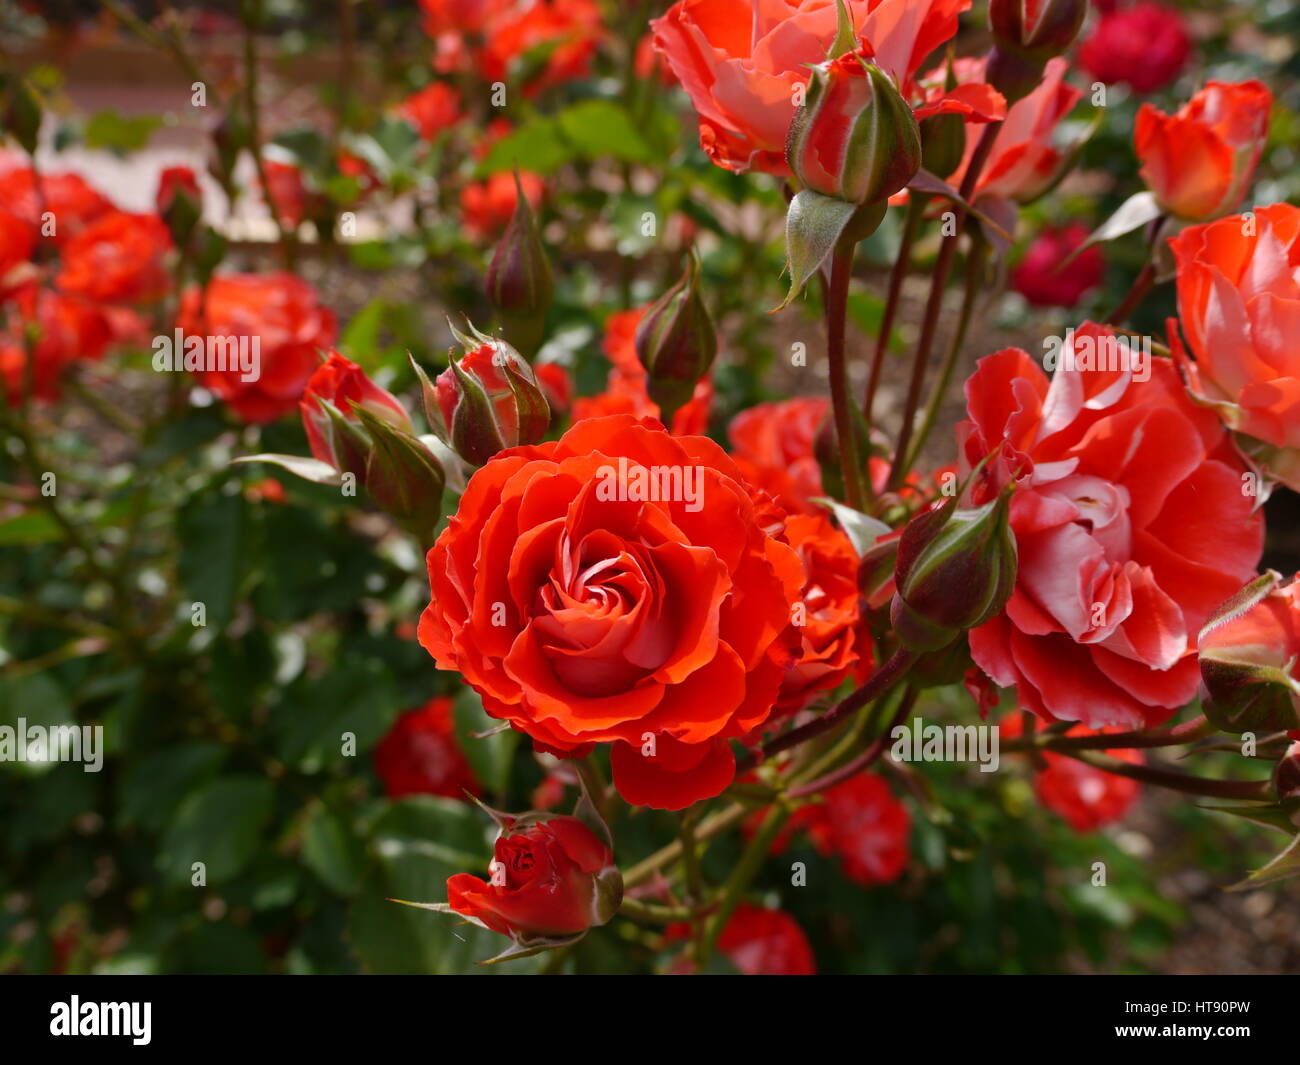 roses from the san mateo rose garden in california Stock Photo